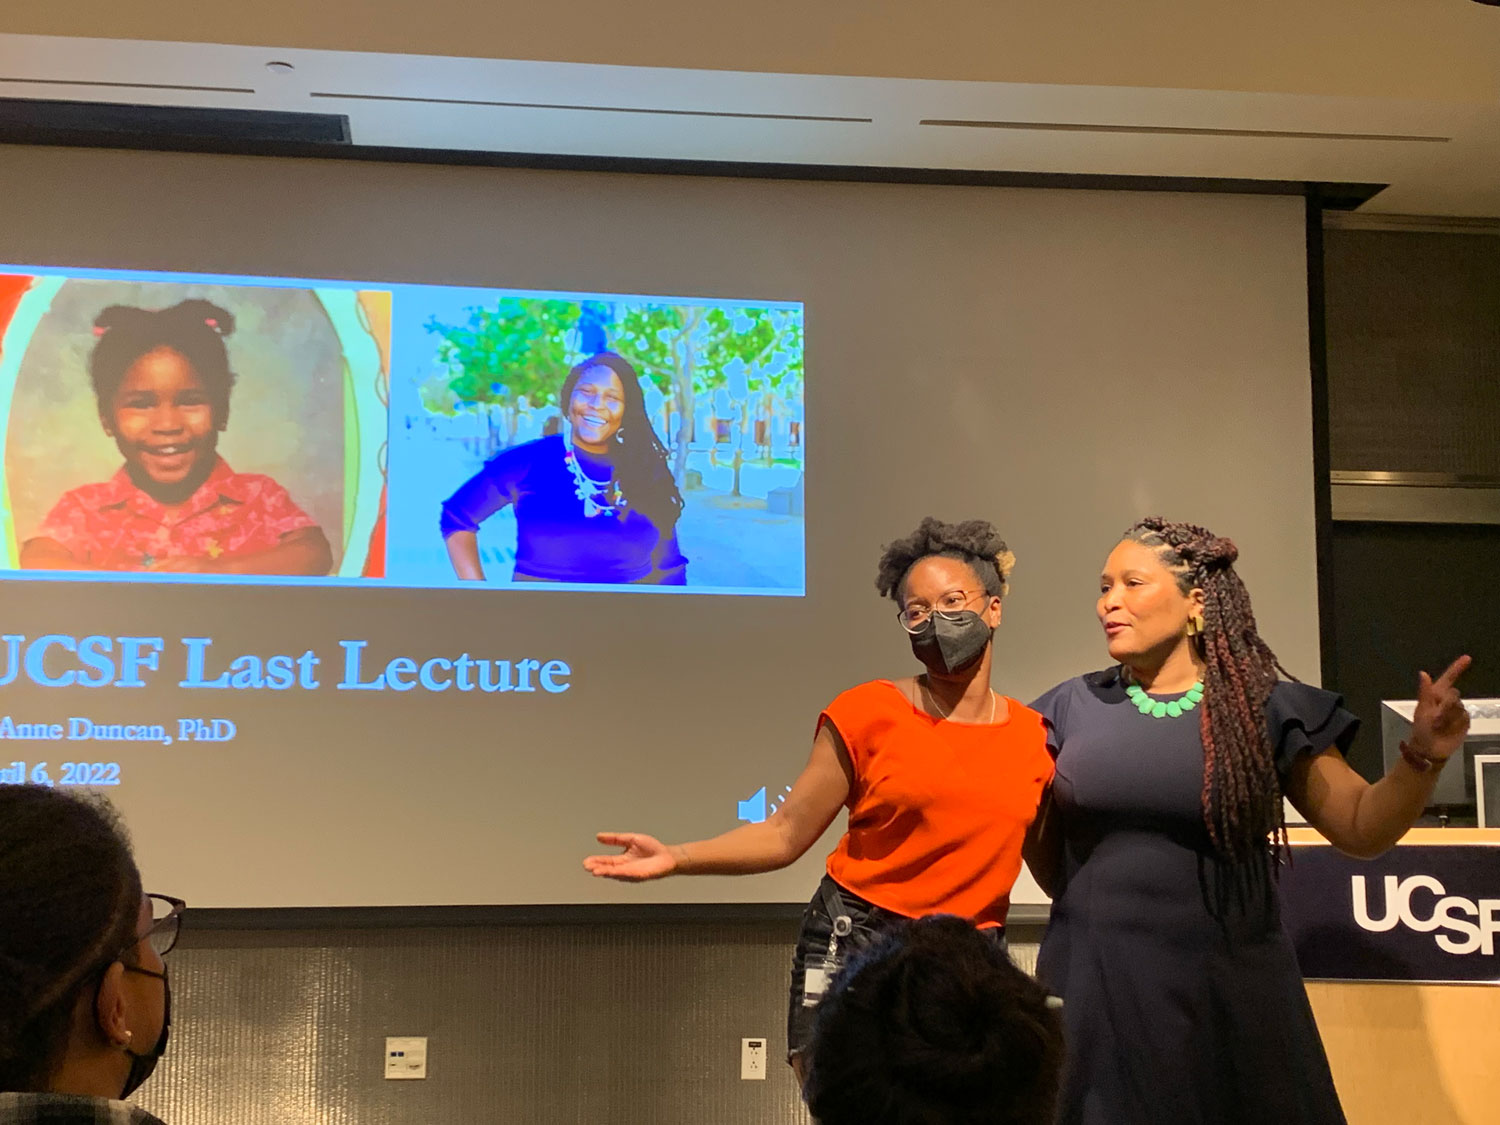 Dr. D'Anne Duncan stands on stage with an attendee of her 2022 Last Lecture event. In the background is a slide reading "UCSF Last Lecture", and a photo of Dr. Duncan as a child, and a current photo of her.